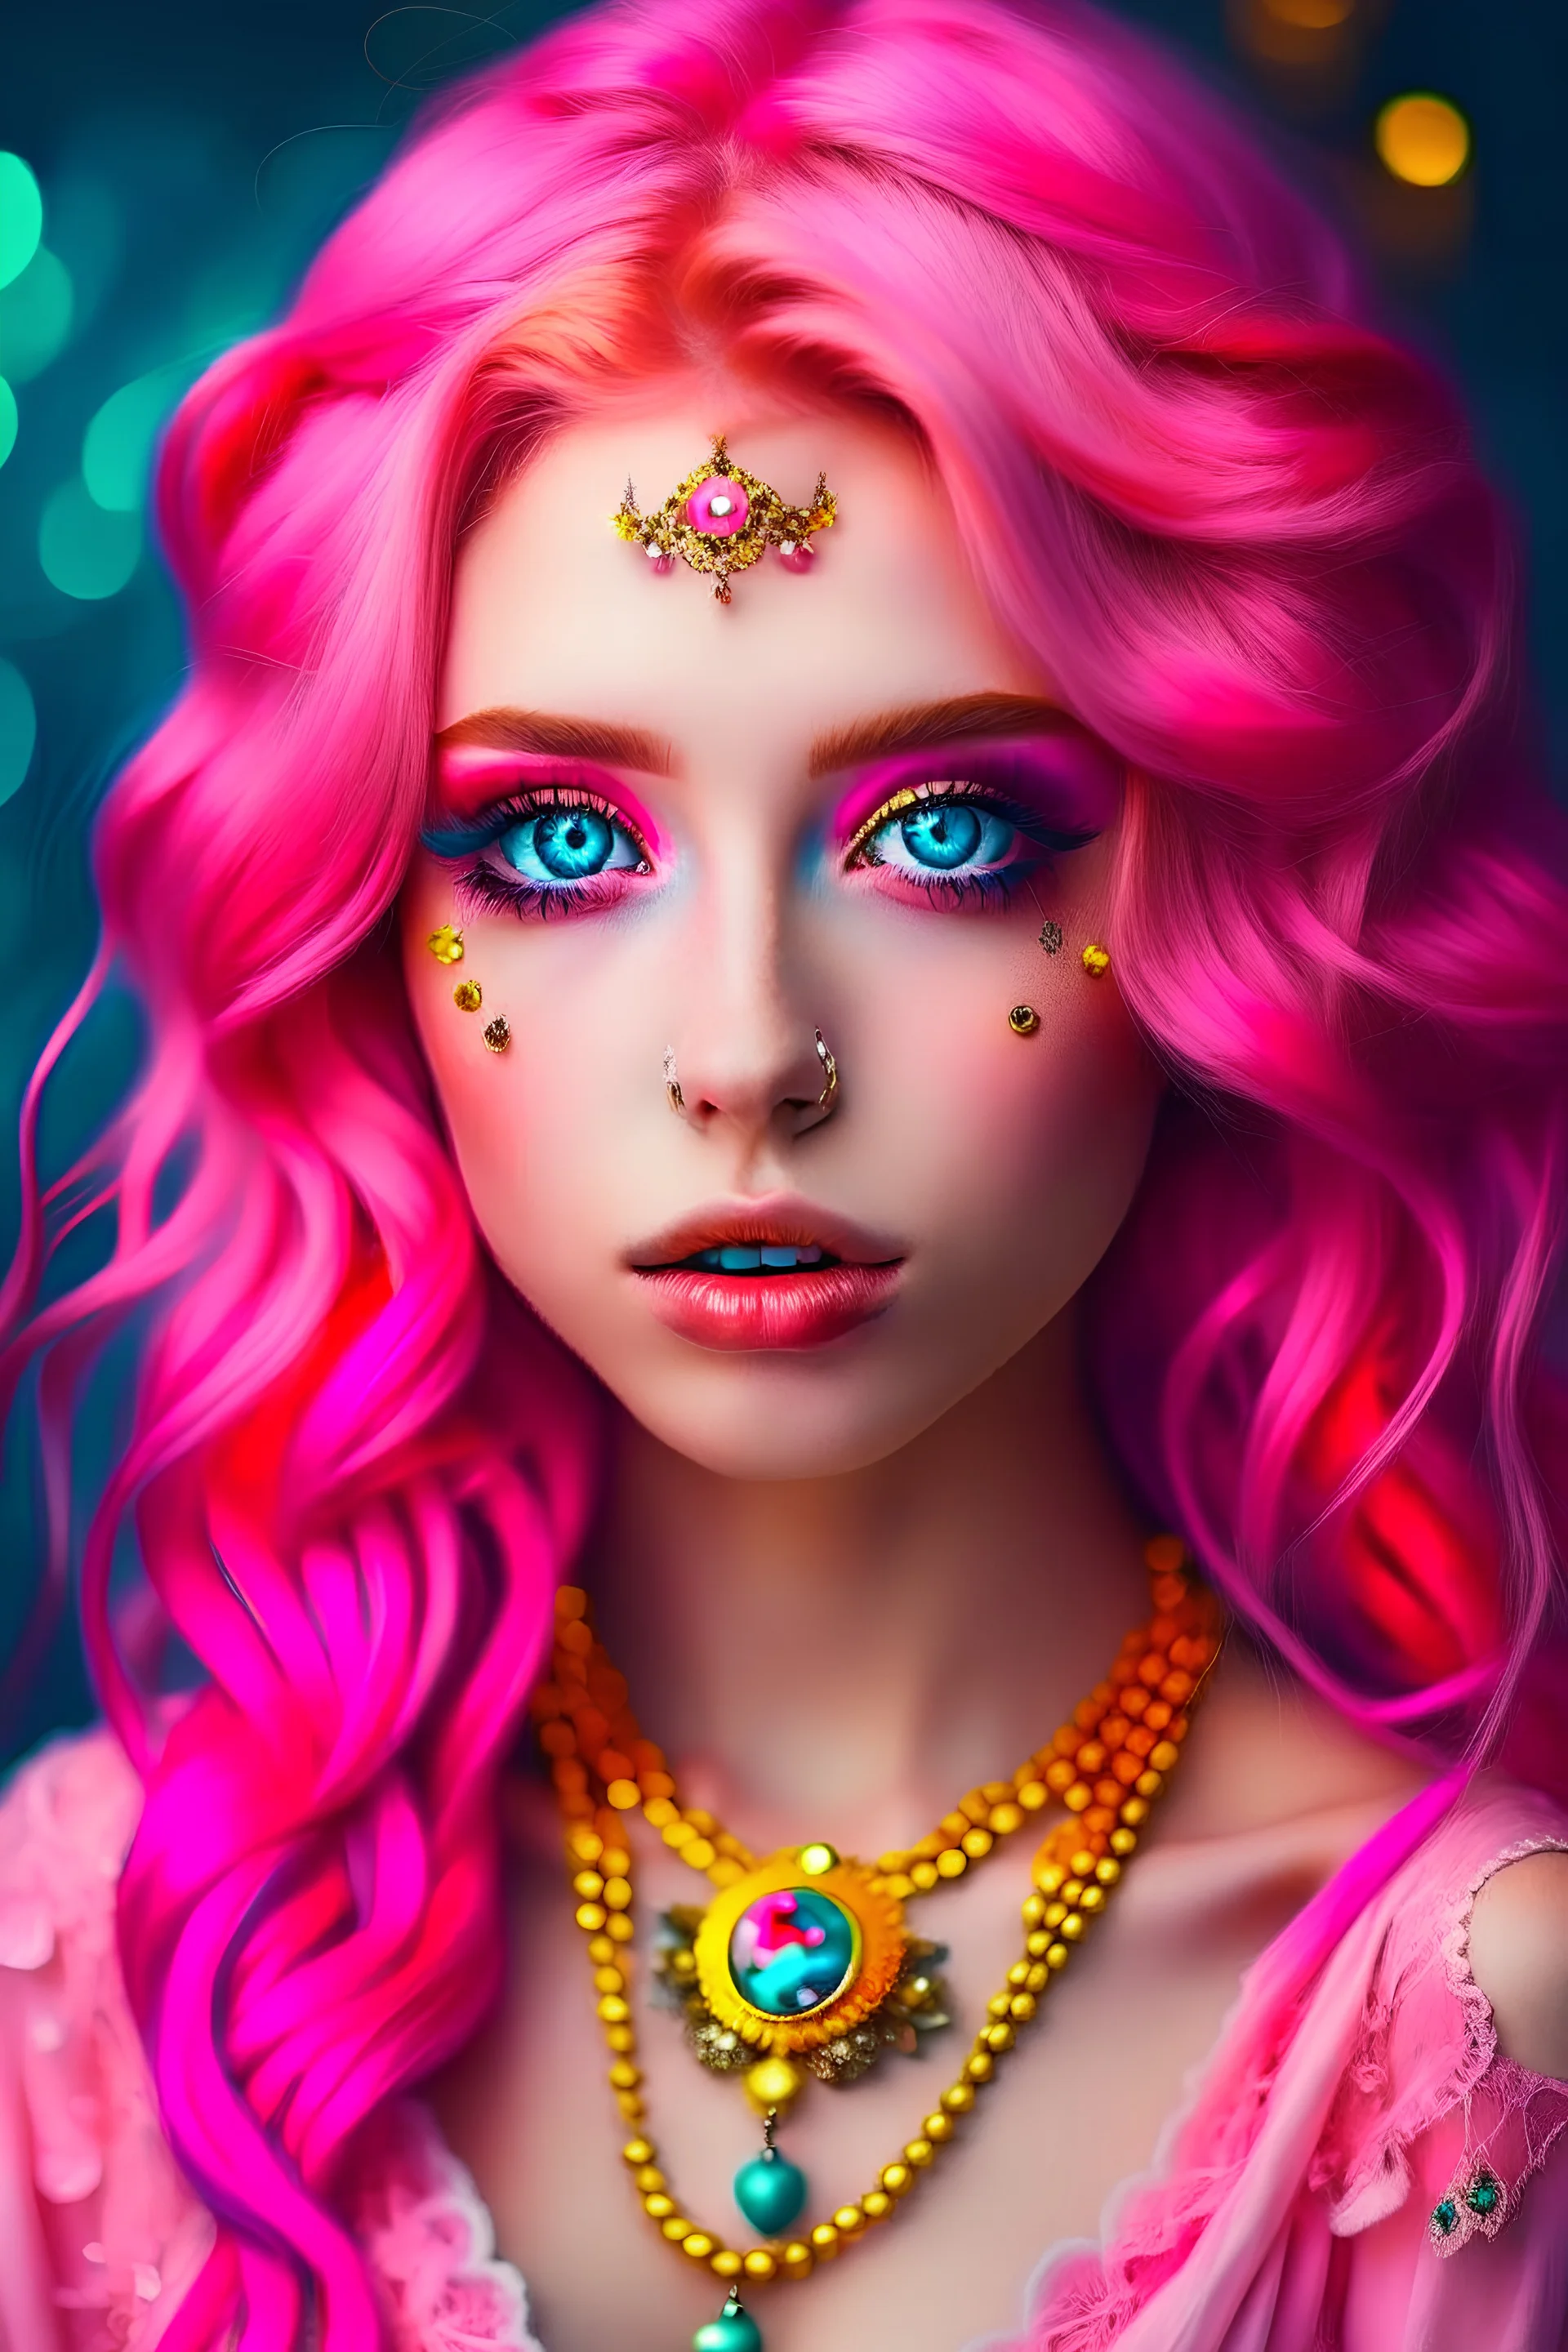 The beauty of a girl with dream-like pink hair, wide eyes resembling jewels, and a slender, graceful body that exudes a touch of magic and femininity."